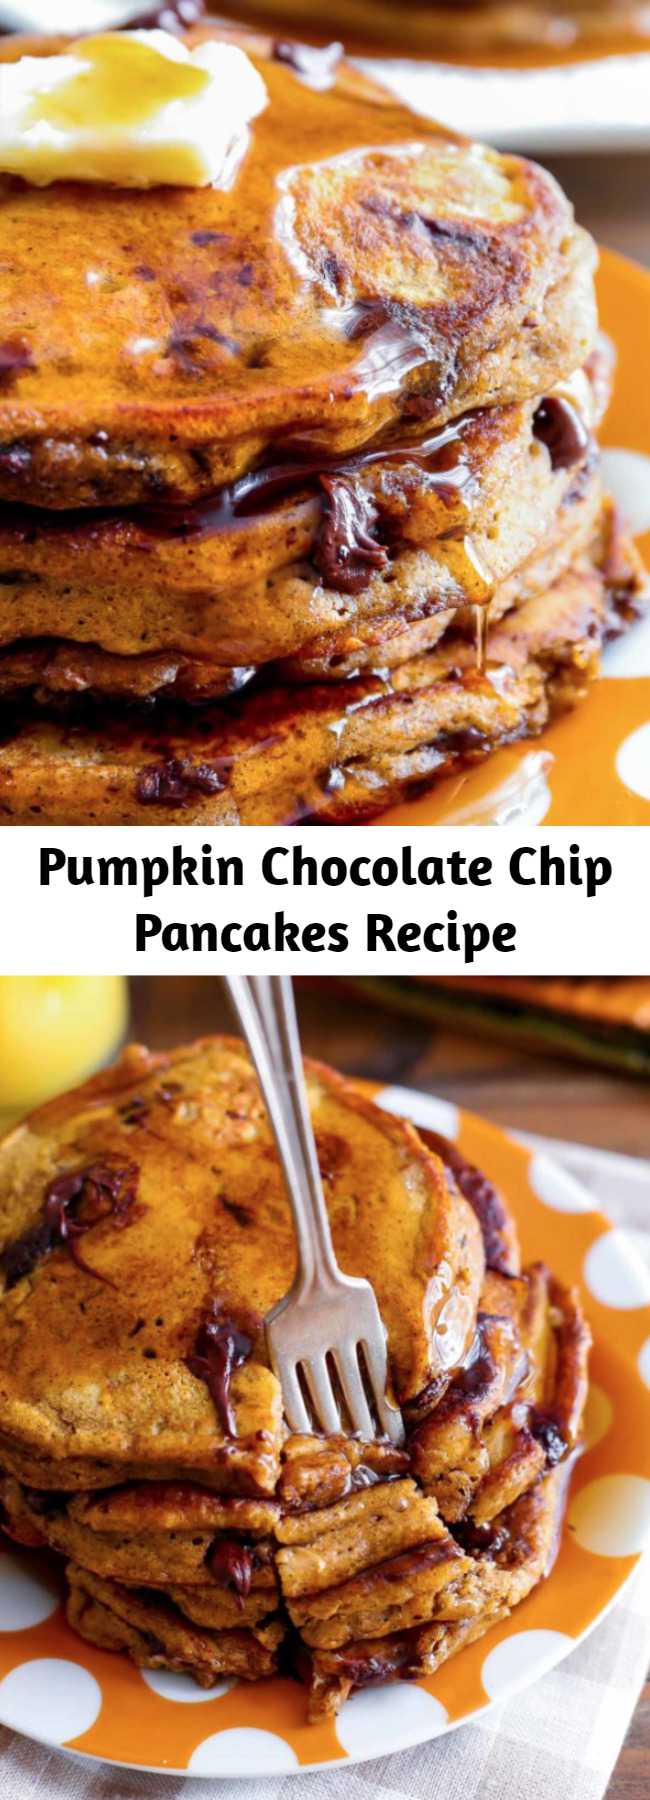 Pumpkin Chocolate Chip Pancakes Recipe - These pumpkin chocolate chip pancakes are the epitome of a cozy fall breakfast! Moist and fluffy, they’re wonderful with a pat of butter and a cascade of maple syrup. You’ll love starting fall mornings with a happy stack of these thick, and flavorful pumpkin pancakes.